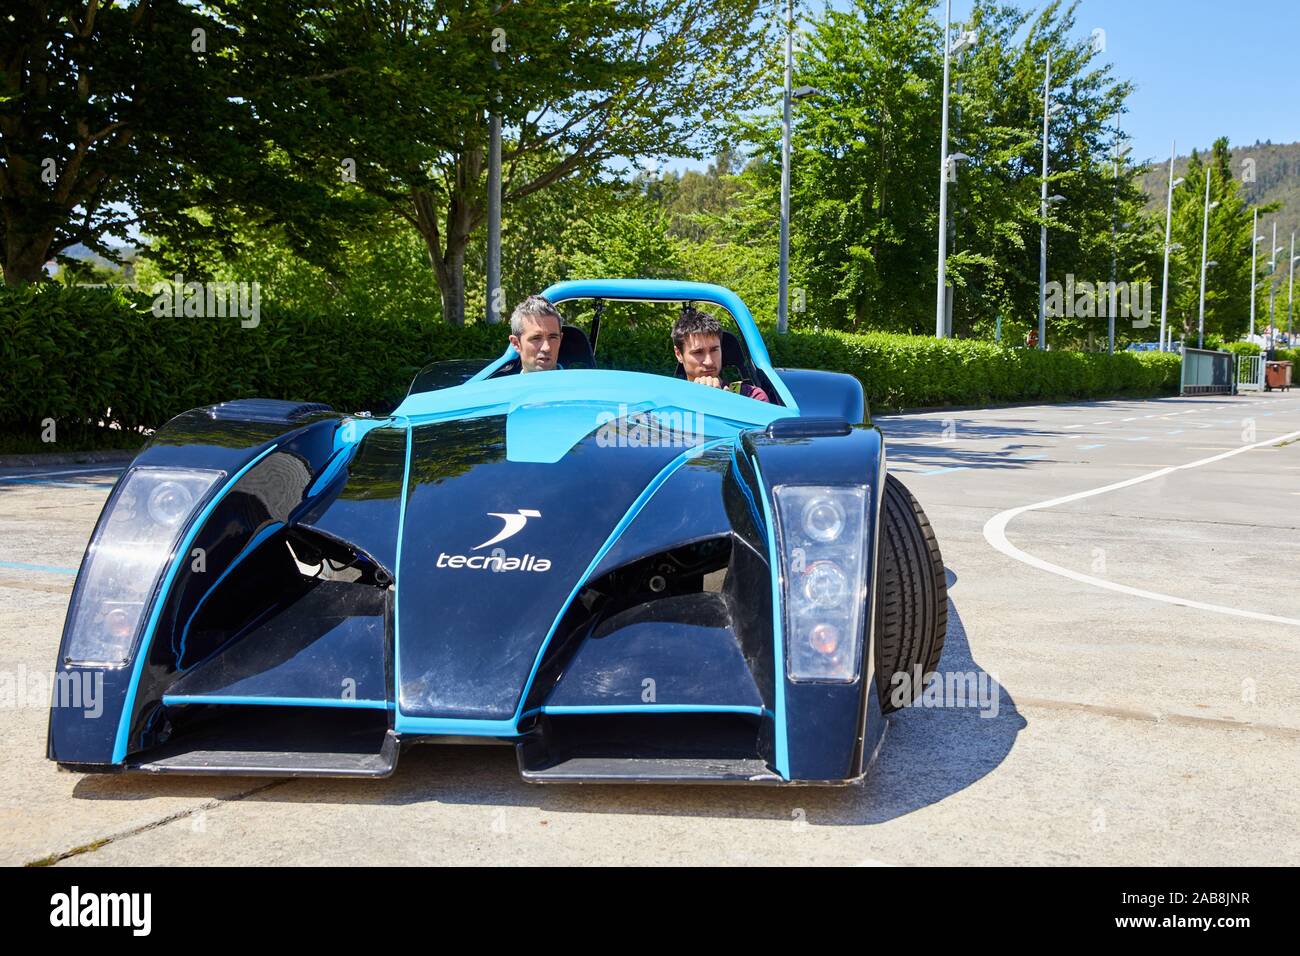 Dynacar, electric vehicle, Researchers work in electric car, Industry Unit, Automotive Industry, Technology Centre, Tecnalia Research & Innovation, Stock Photo